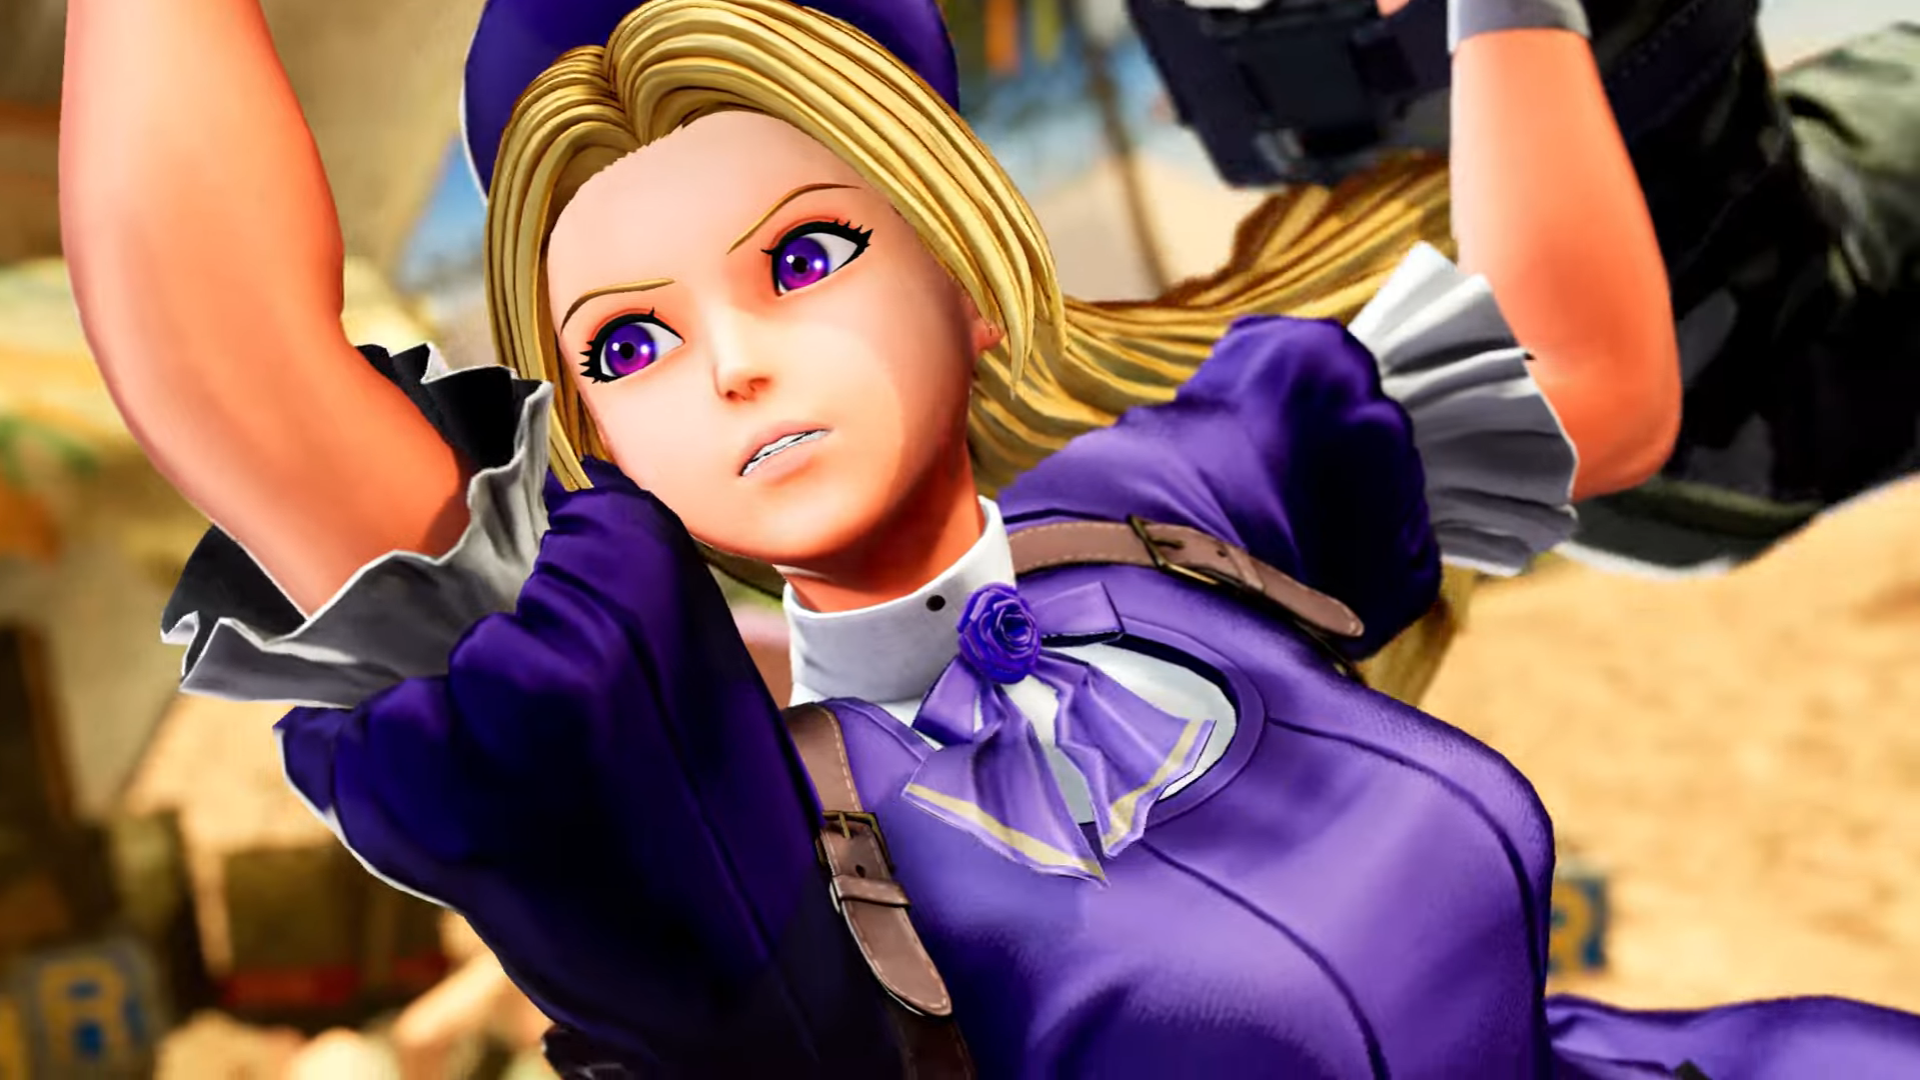 The King of Fighters XV Gameplay Trailer Highlights Hinako Shijo; Releasing Next Week